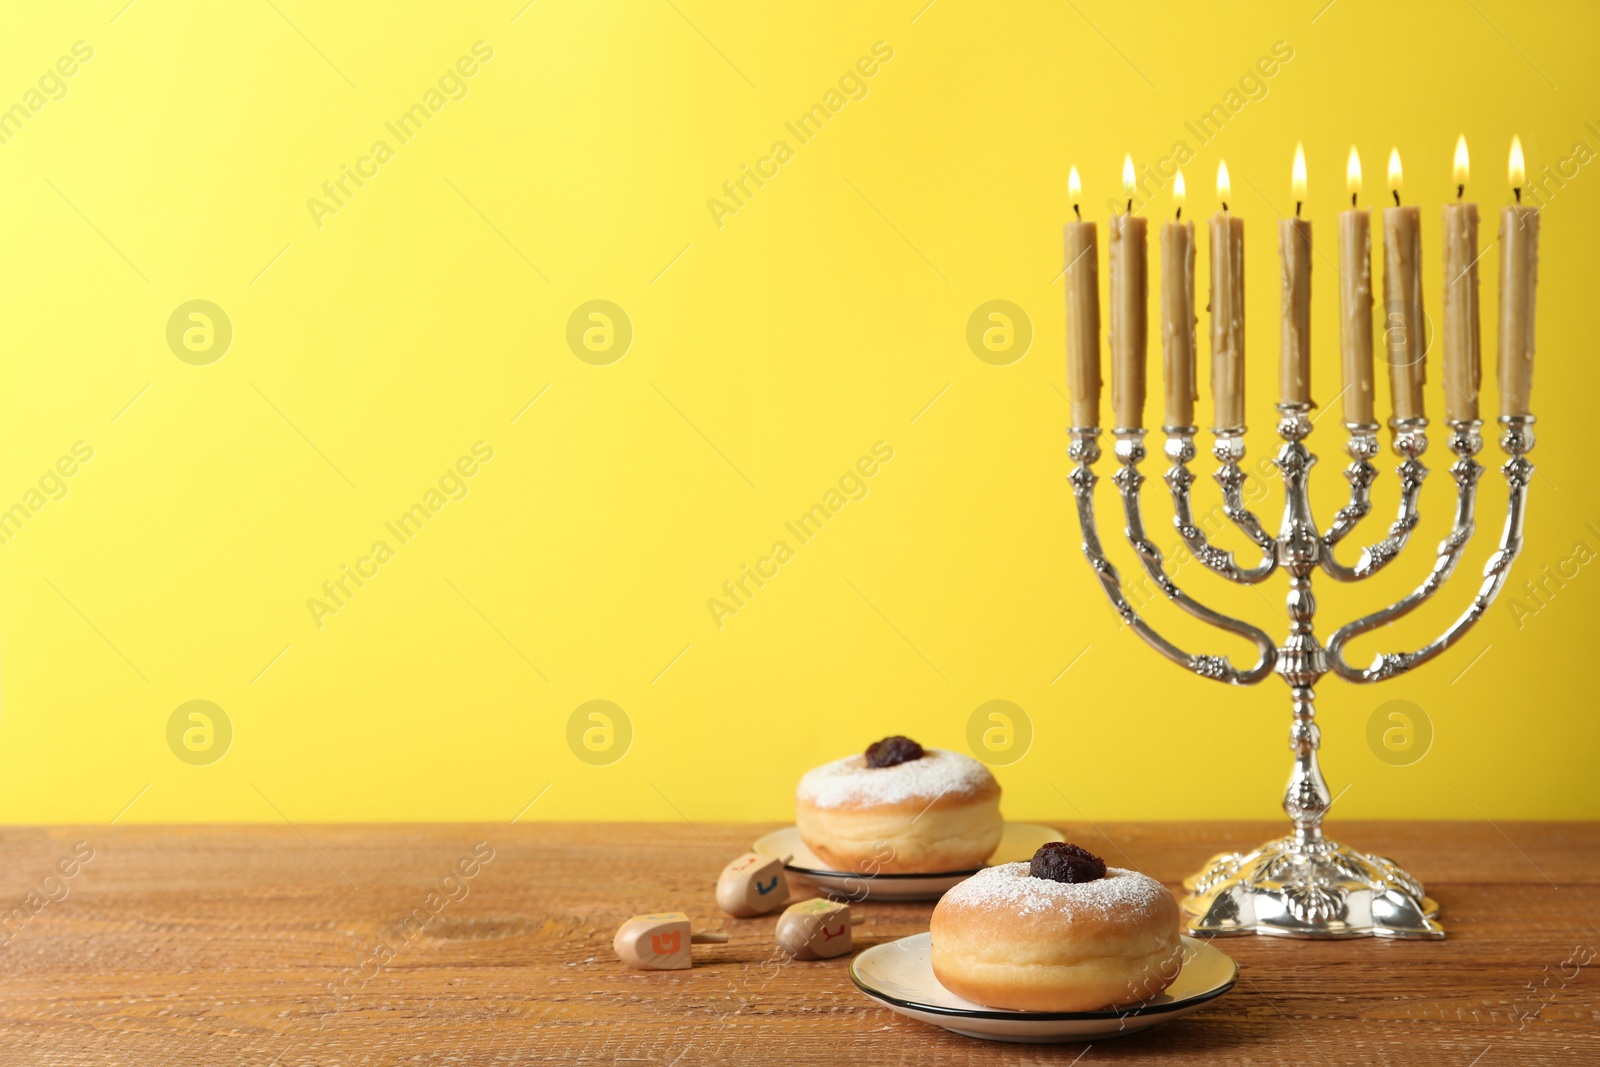 Photo of Silver menorah, dreidels with He, Pe, Nun, Gimel letters and sufganiyot on wooden table against yellow background, space for text. Hanukkah symbols